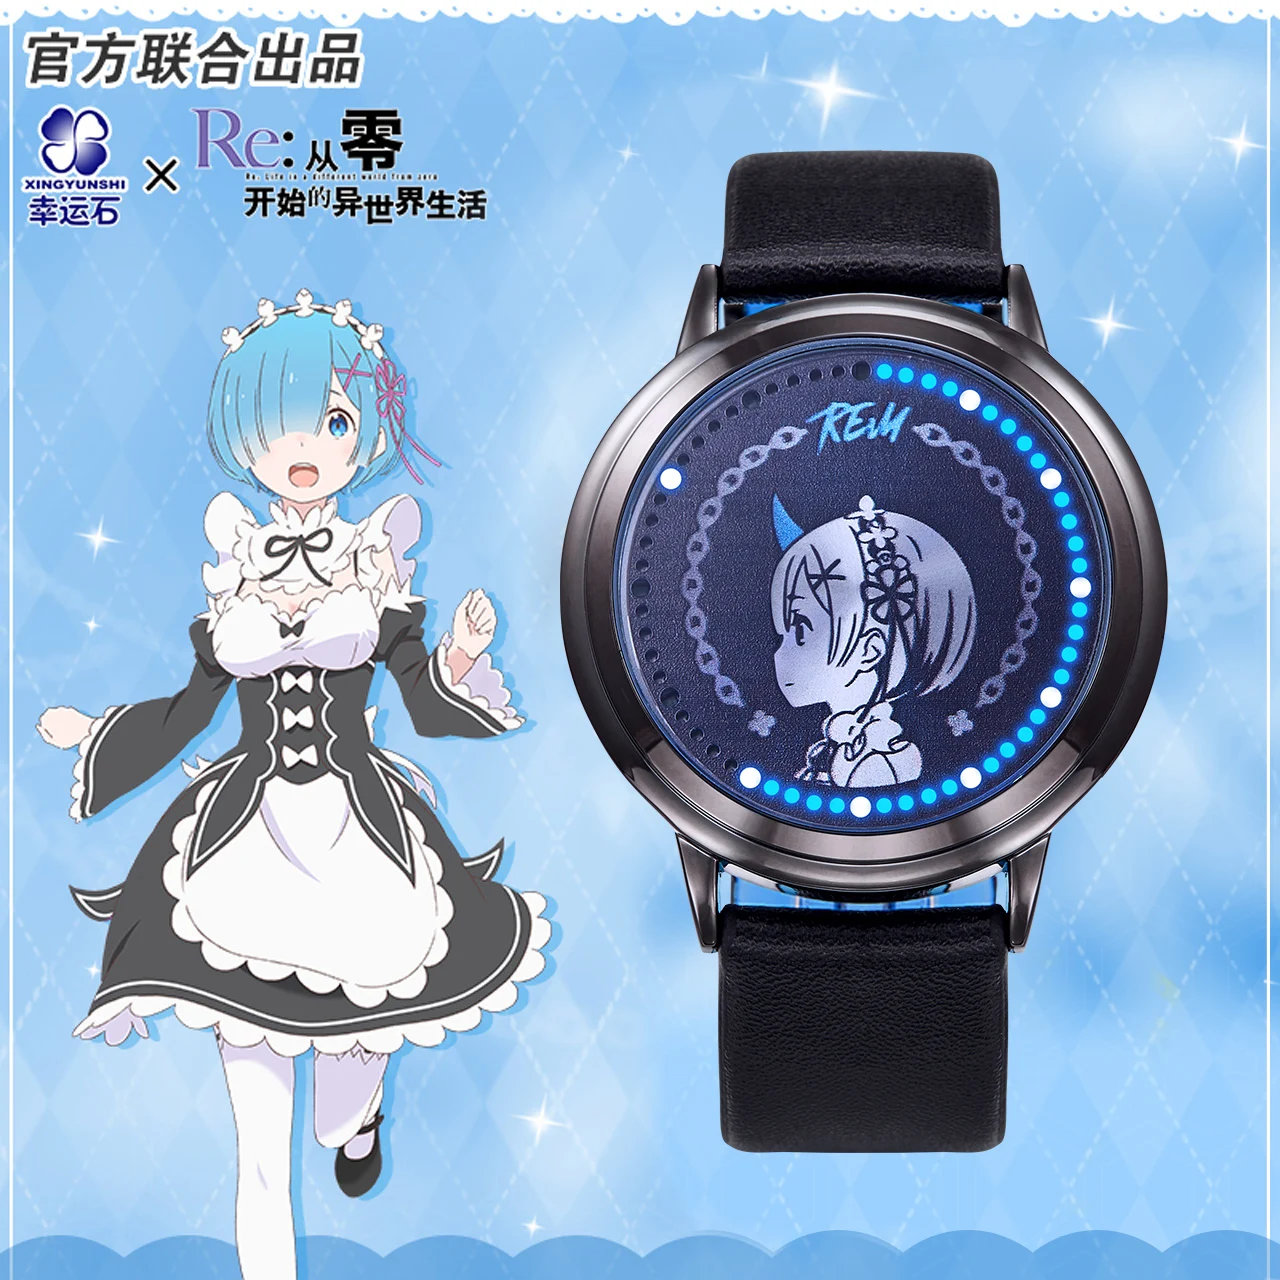 Re:Radio Life In A Different World From Zero Rezero Re0 Anime Rem LED Watch Waterproof Manga Role Action Figure Gift